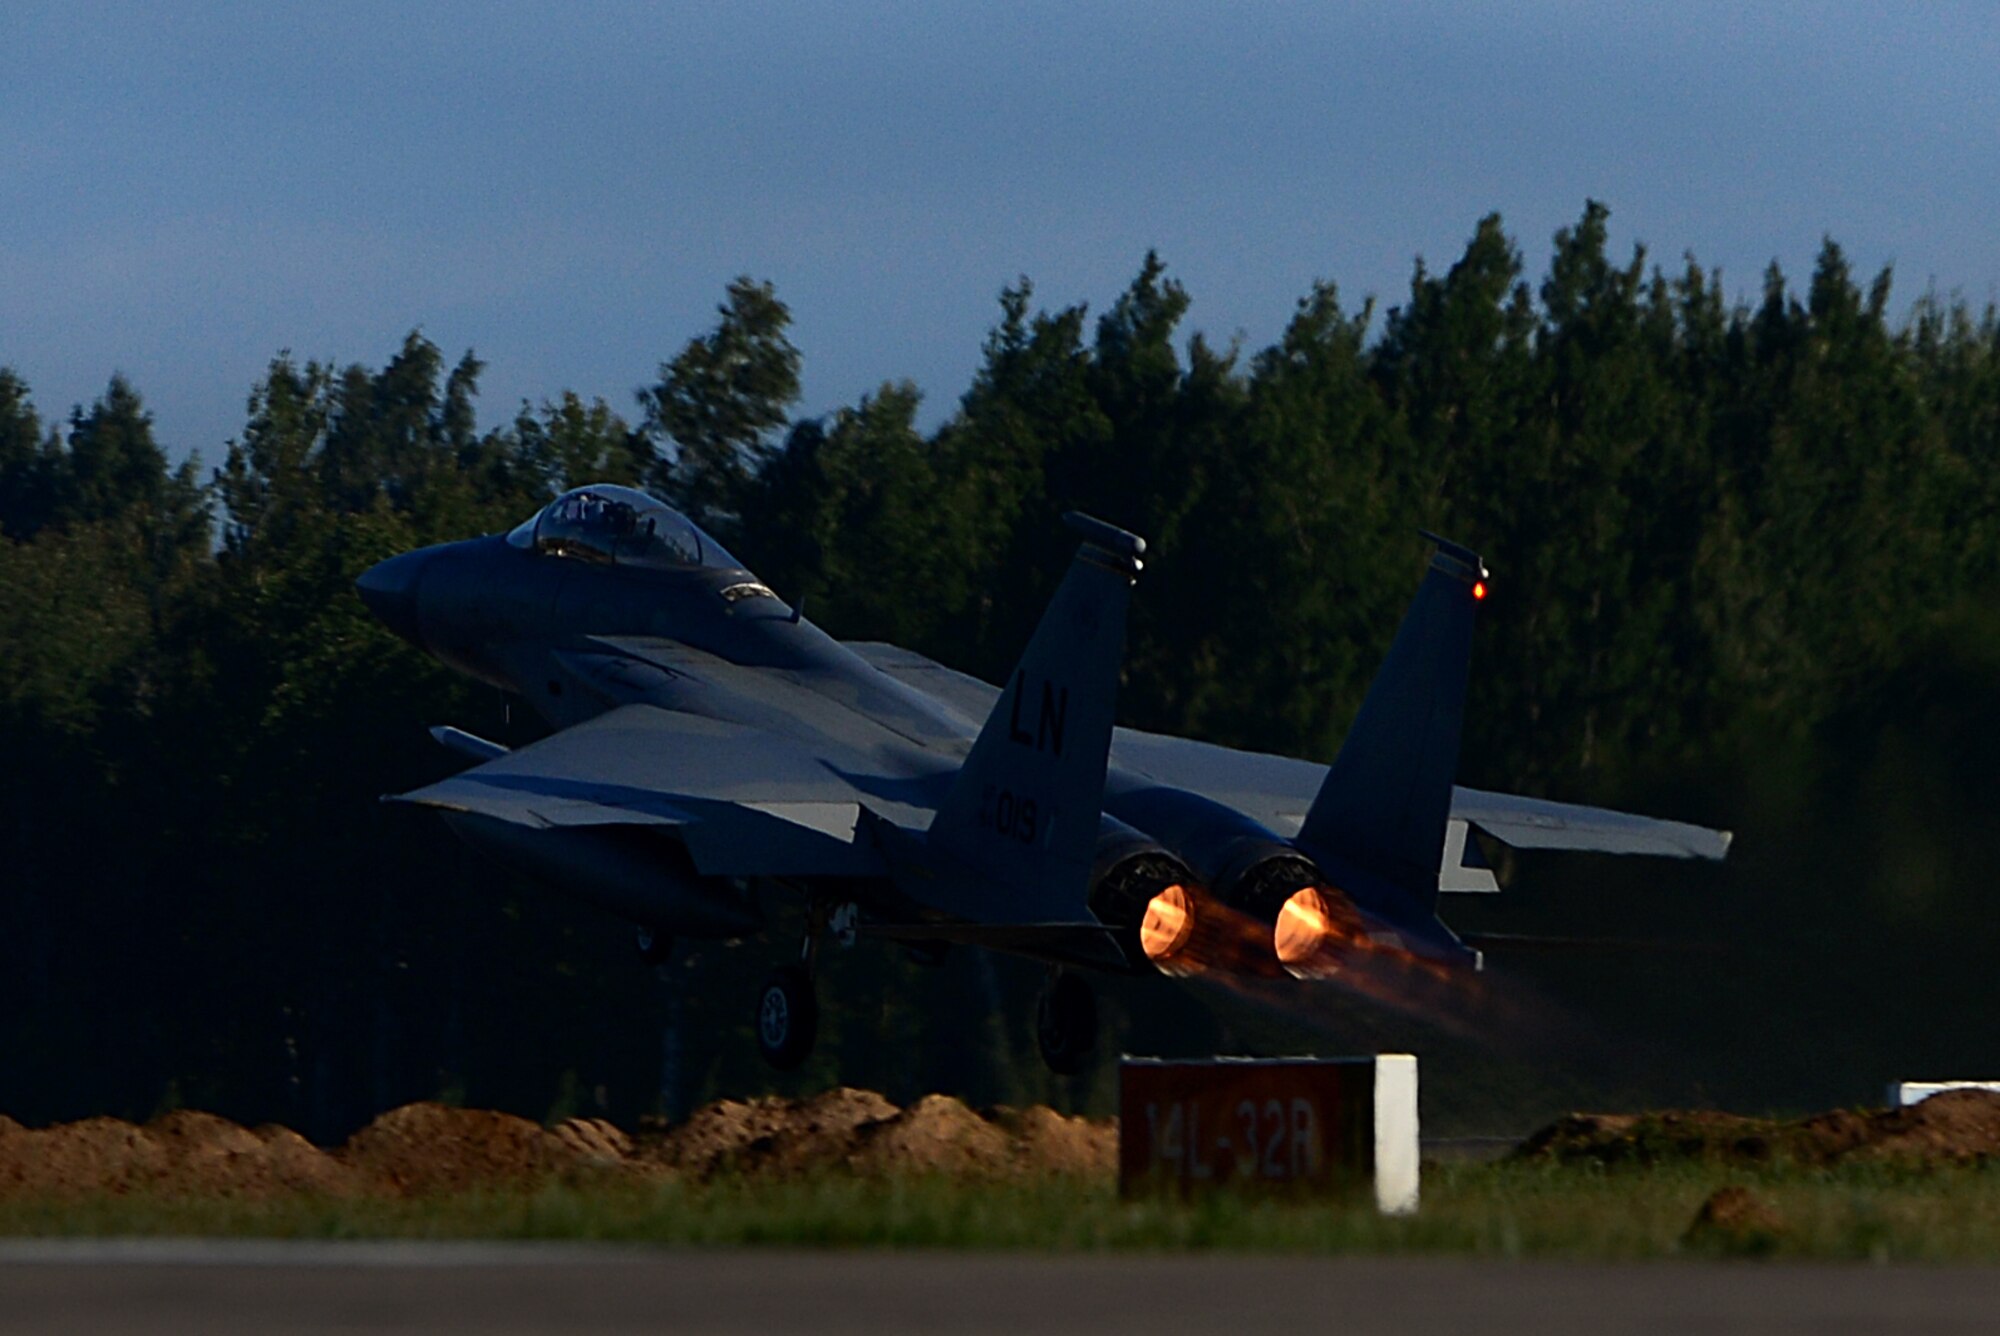 A U.S. F-15C Eagle launches for a sortie in support of the NATO Baltic Air Police mission at Siauliai Air Base, Lithuania, Sept. 8. The 493rd Expeditionary Fighter Squadron has successfully intercepted, interrogated and redirected two aircraft and conducted twenty sorties while serving to protect the skies above the Baltic region. (U.S. Air Force photo/ Tech. Sgt. Matthew Plew)